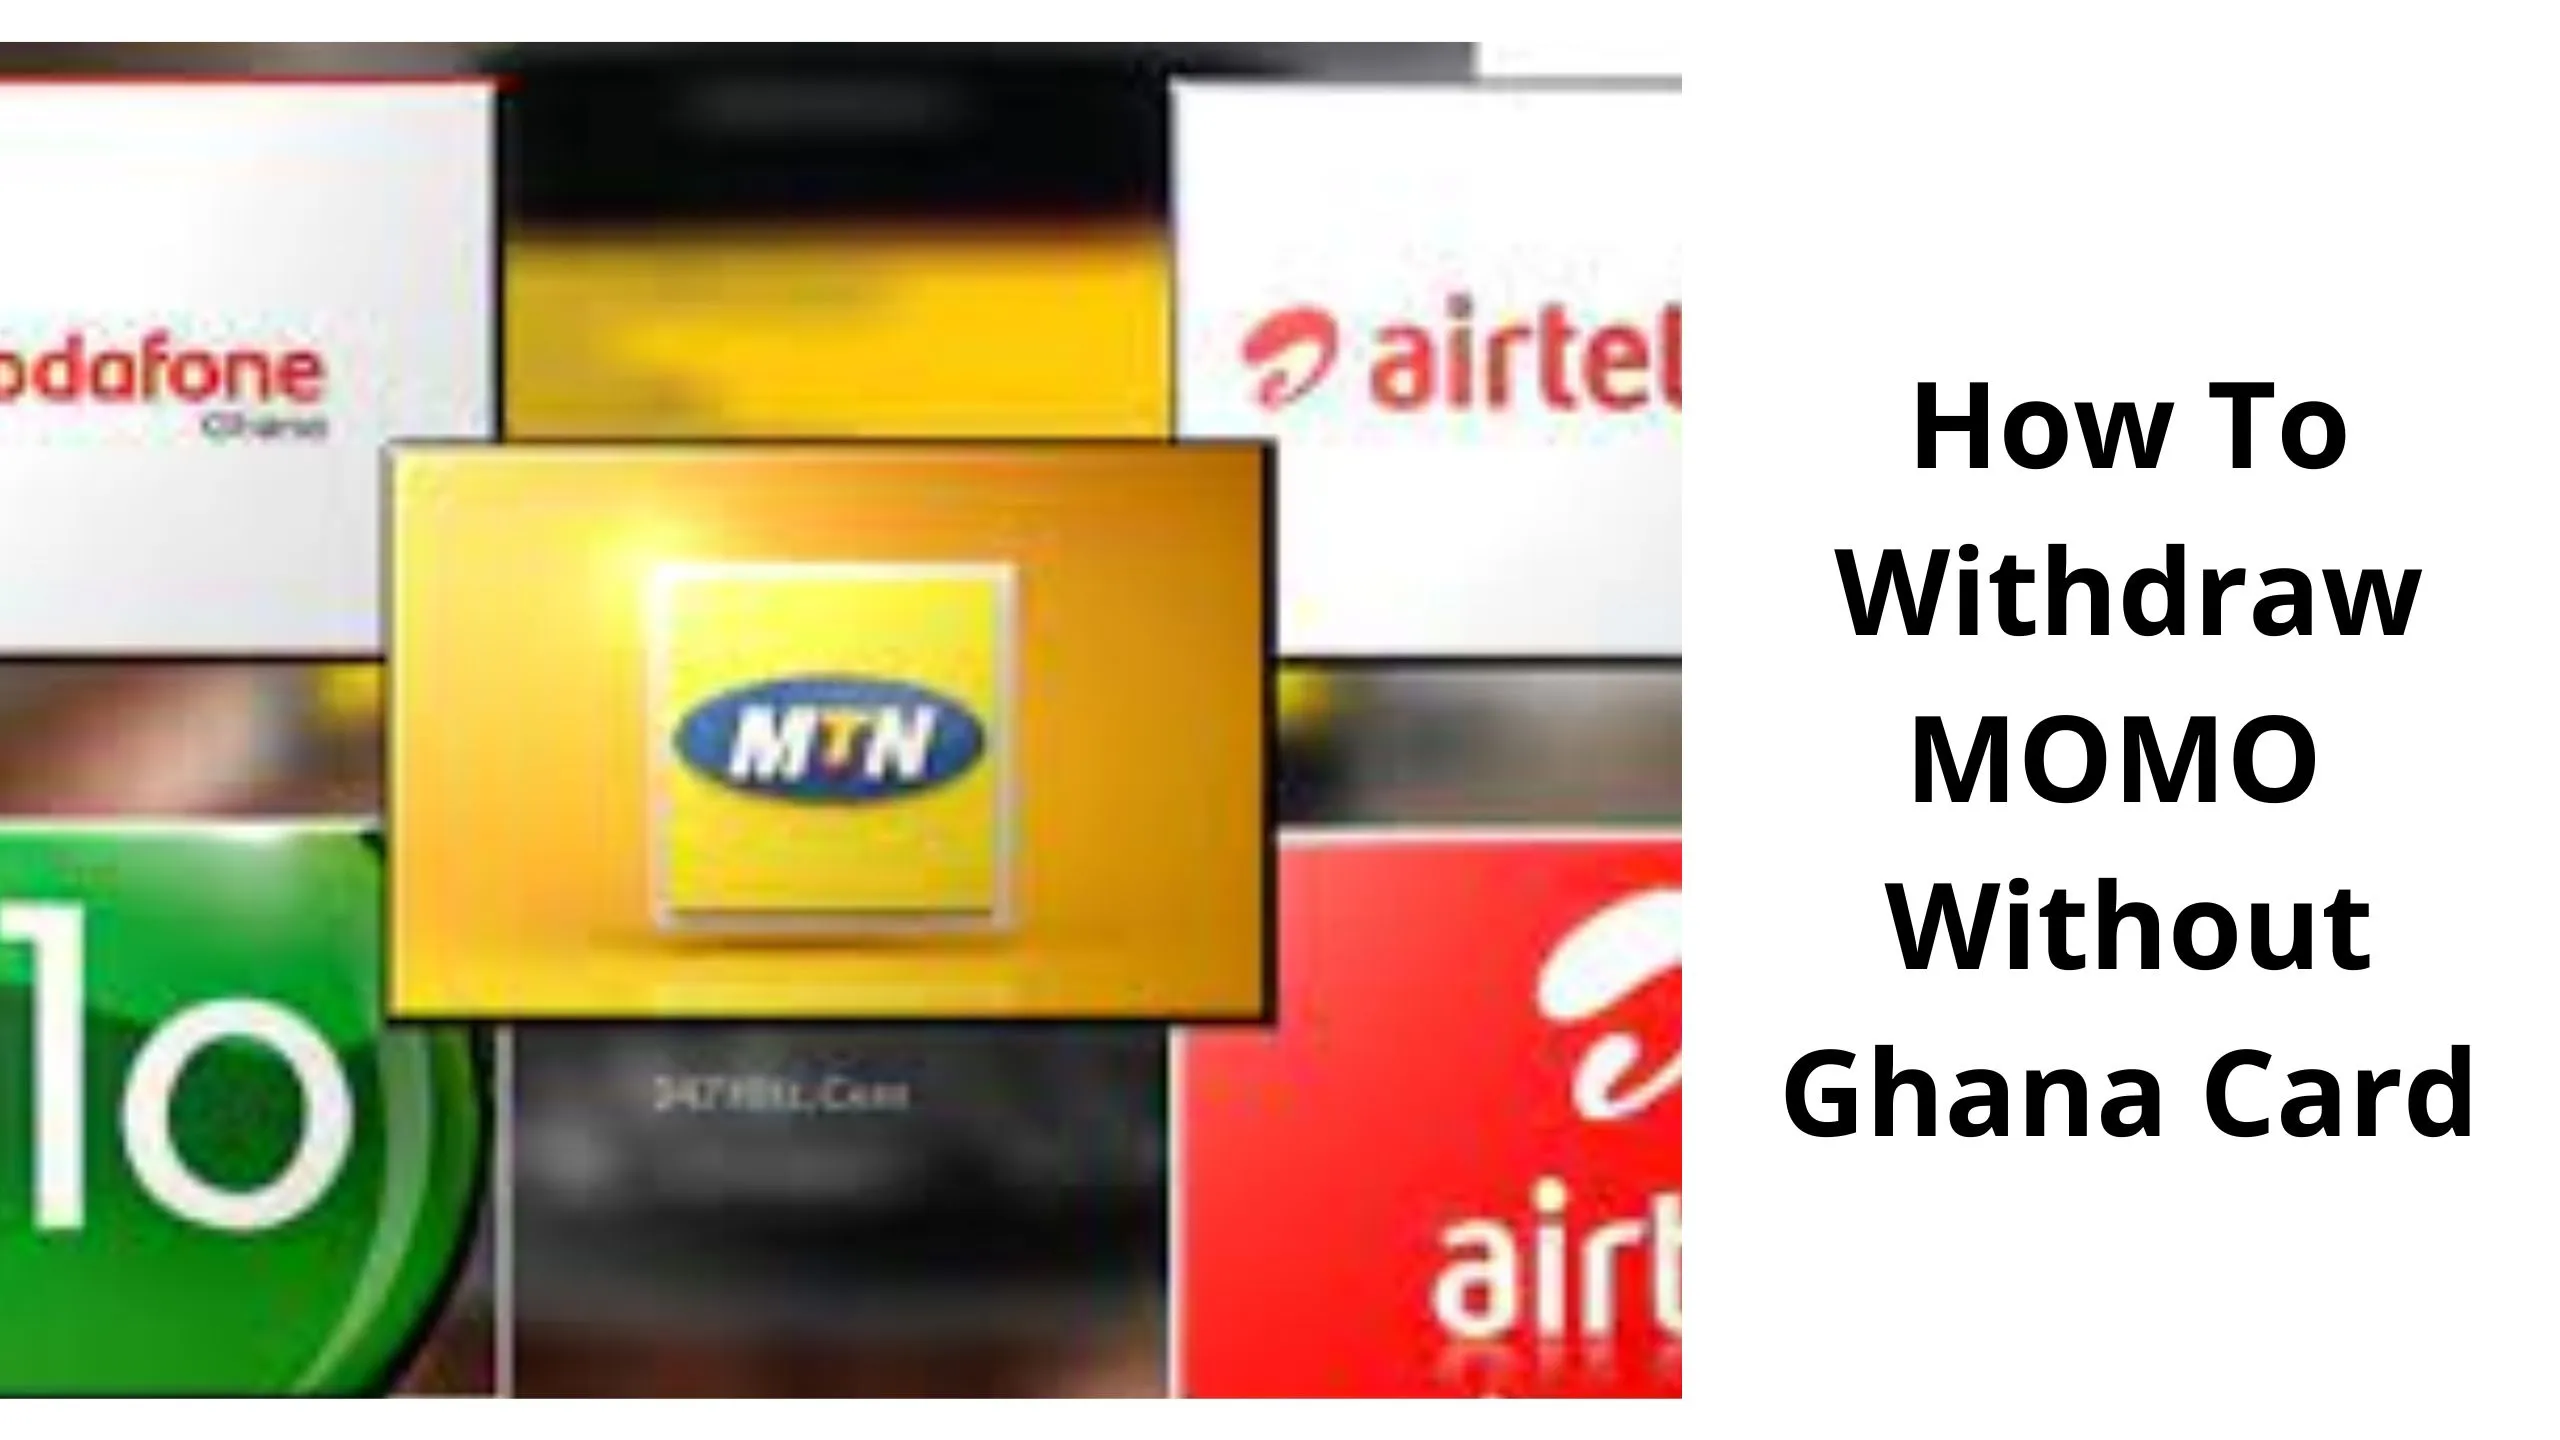 How To Withdraw MOMO Without Ghana Card